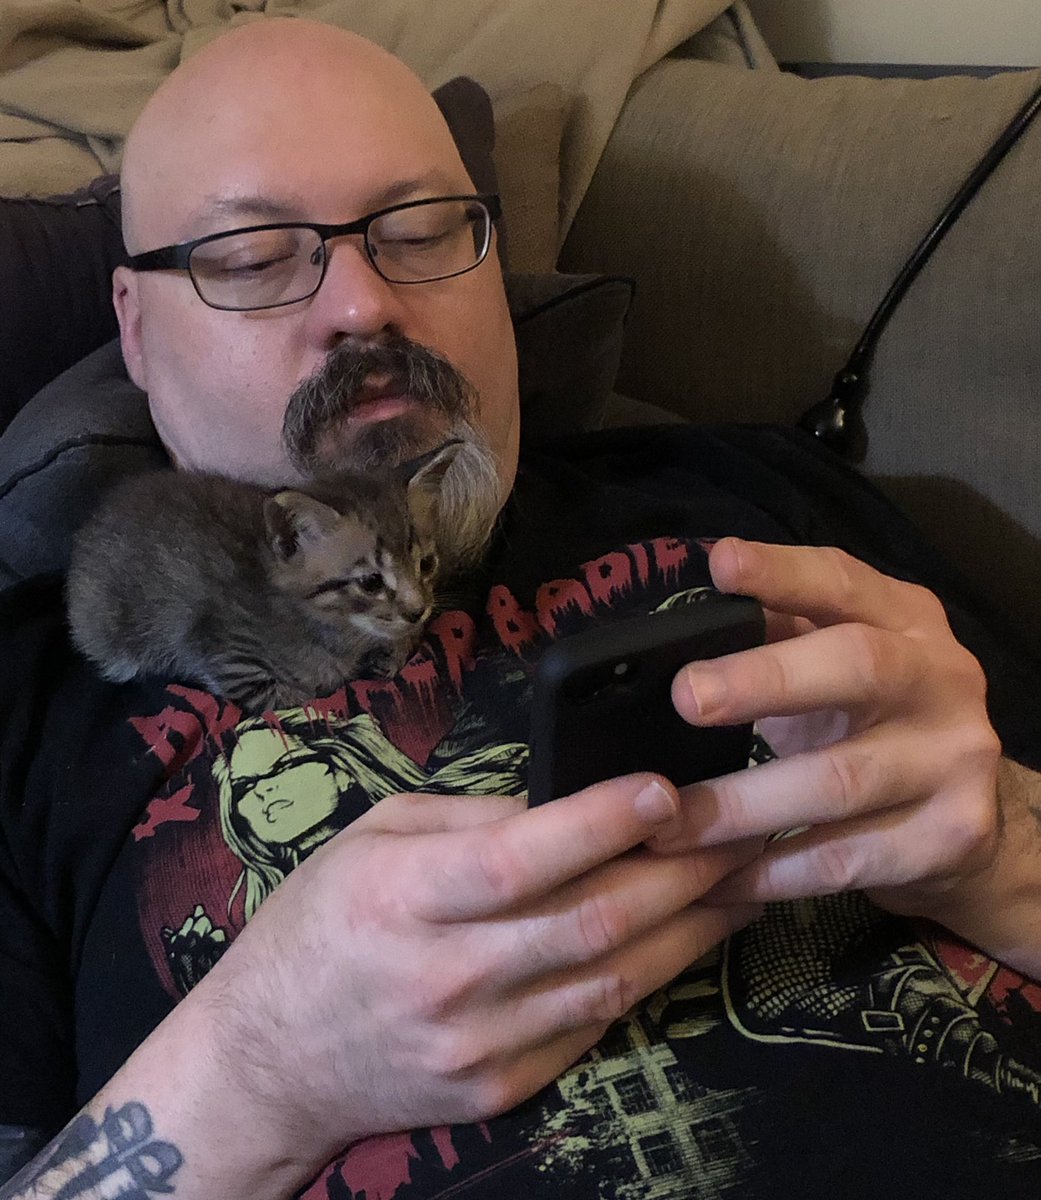 Kevin, no! Don’t show the kitten the Internet yet! It’s too young!